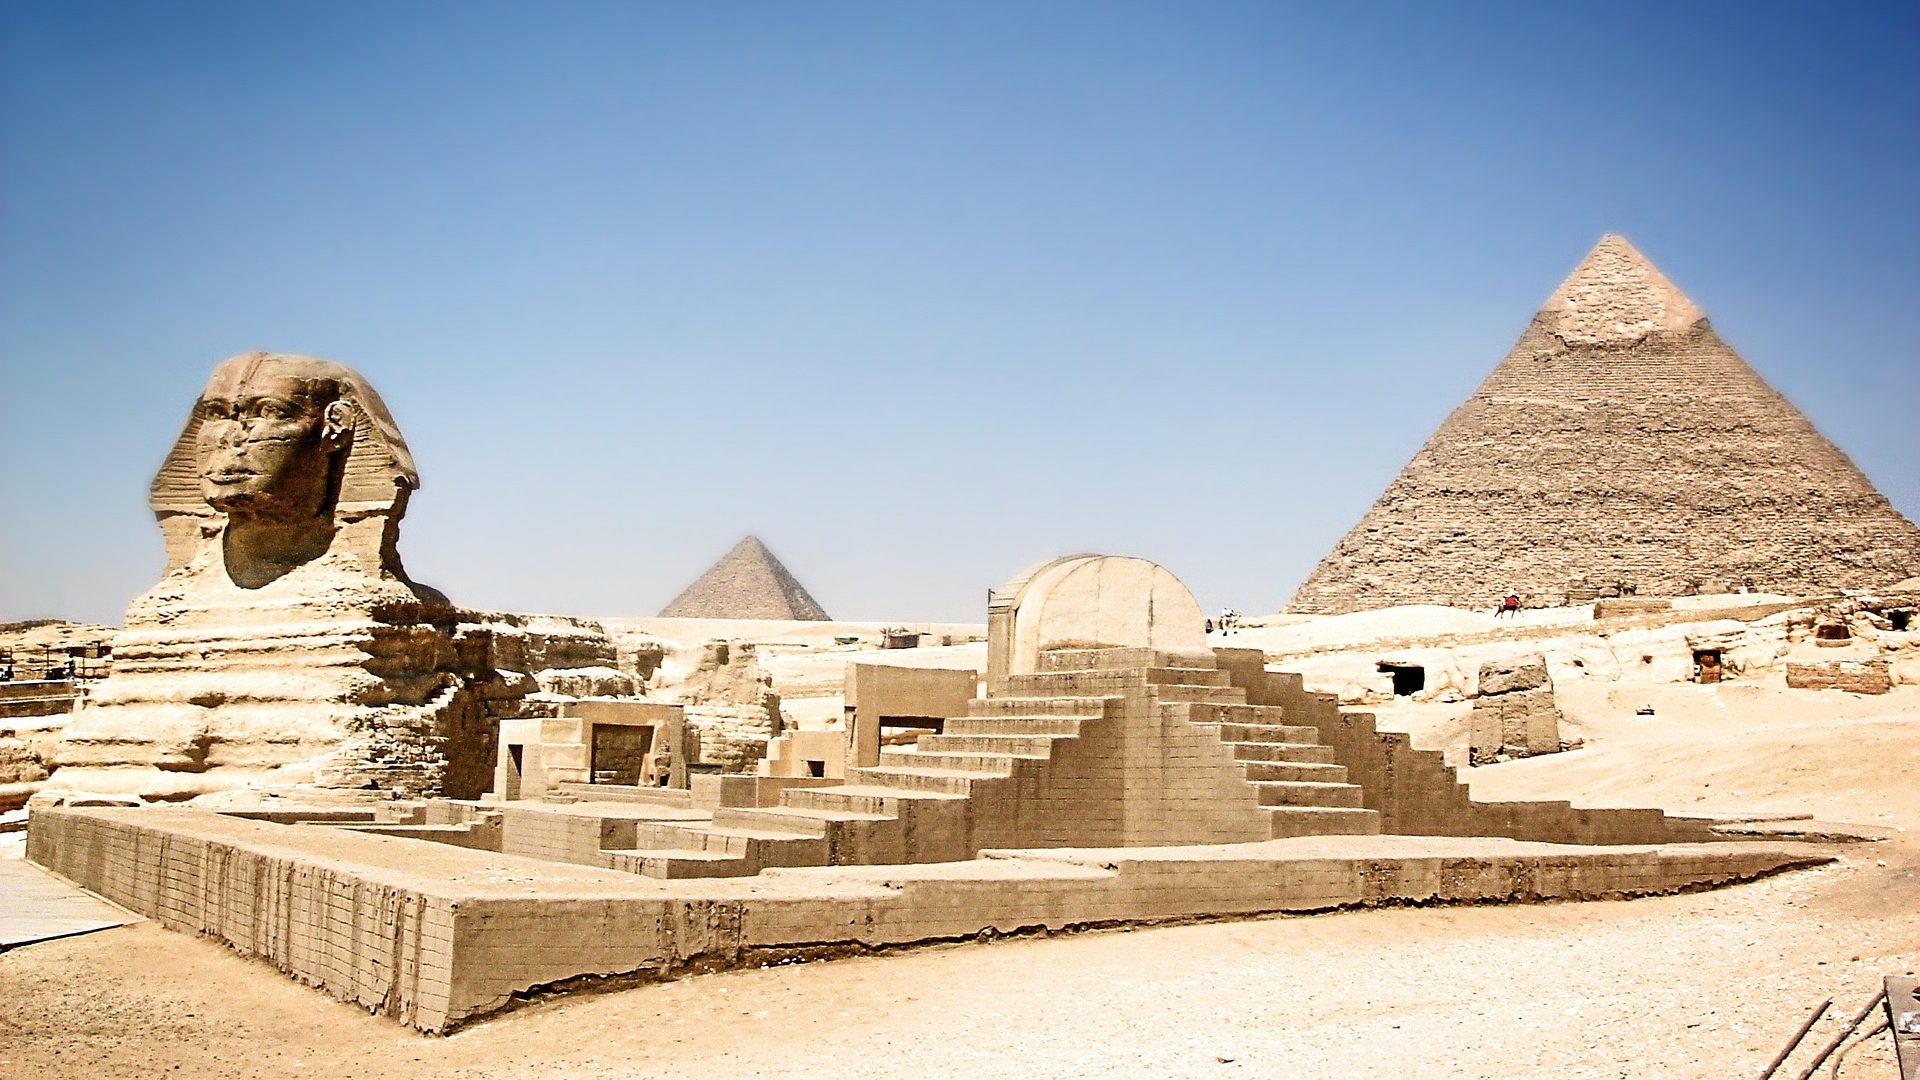 Photos of ancient pyramids in Egypt.